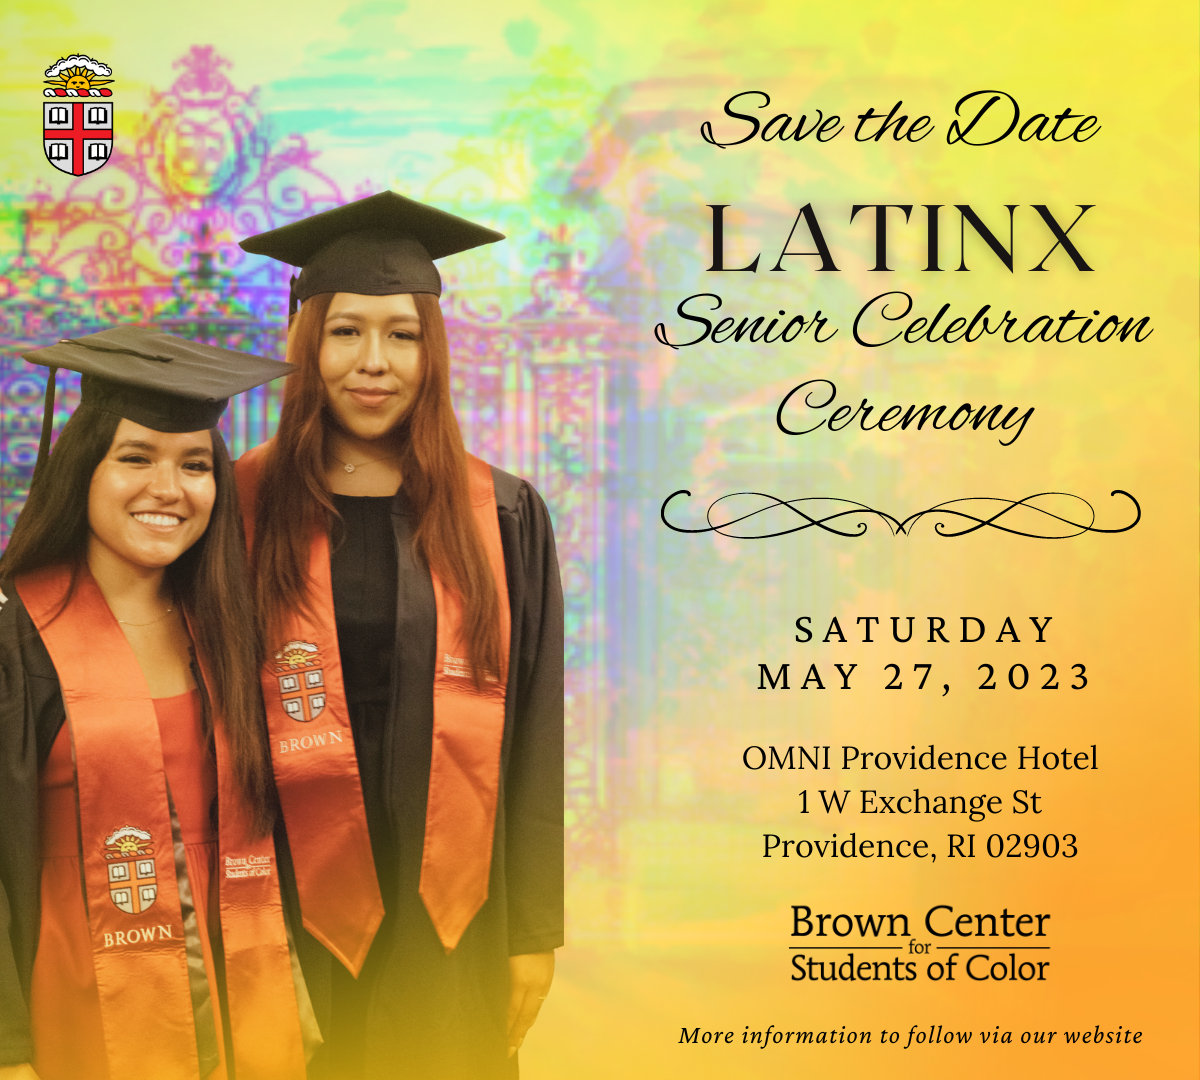 Latinx Save the Date